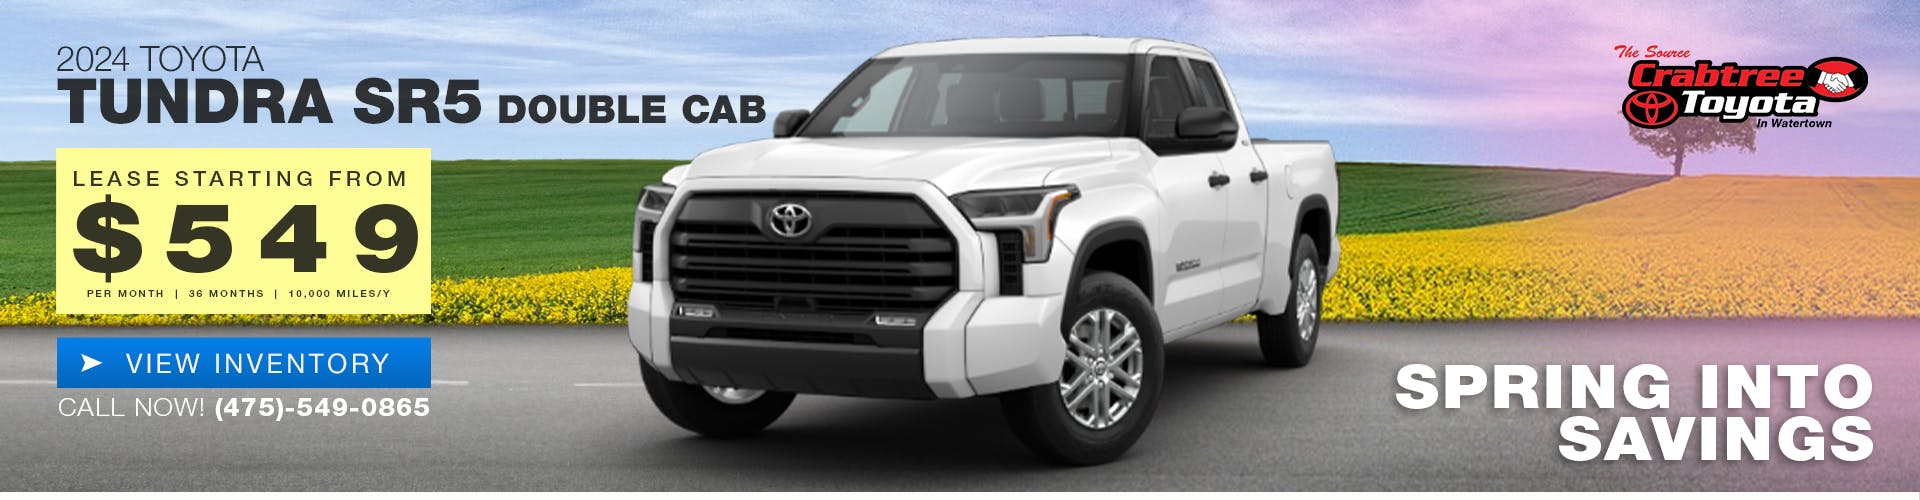 TOYOTA TUNDRA SR5 Double Cab Standard Bed LEASE OFFER